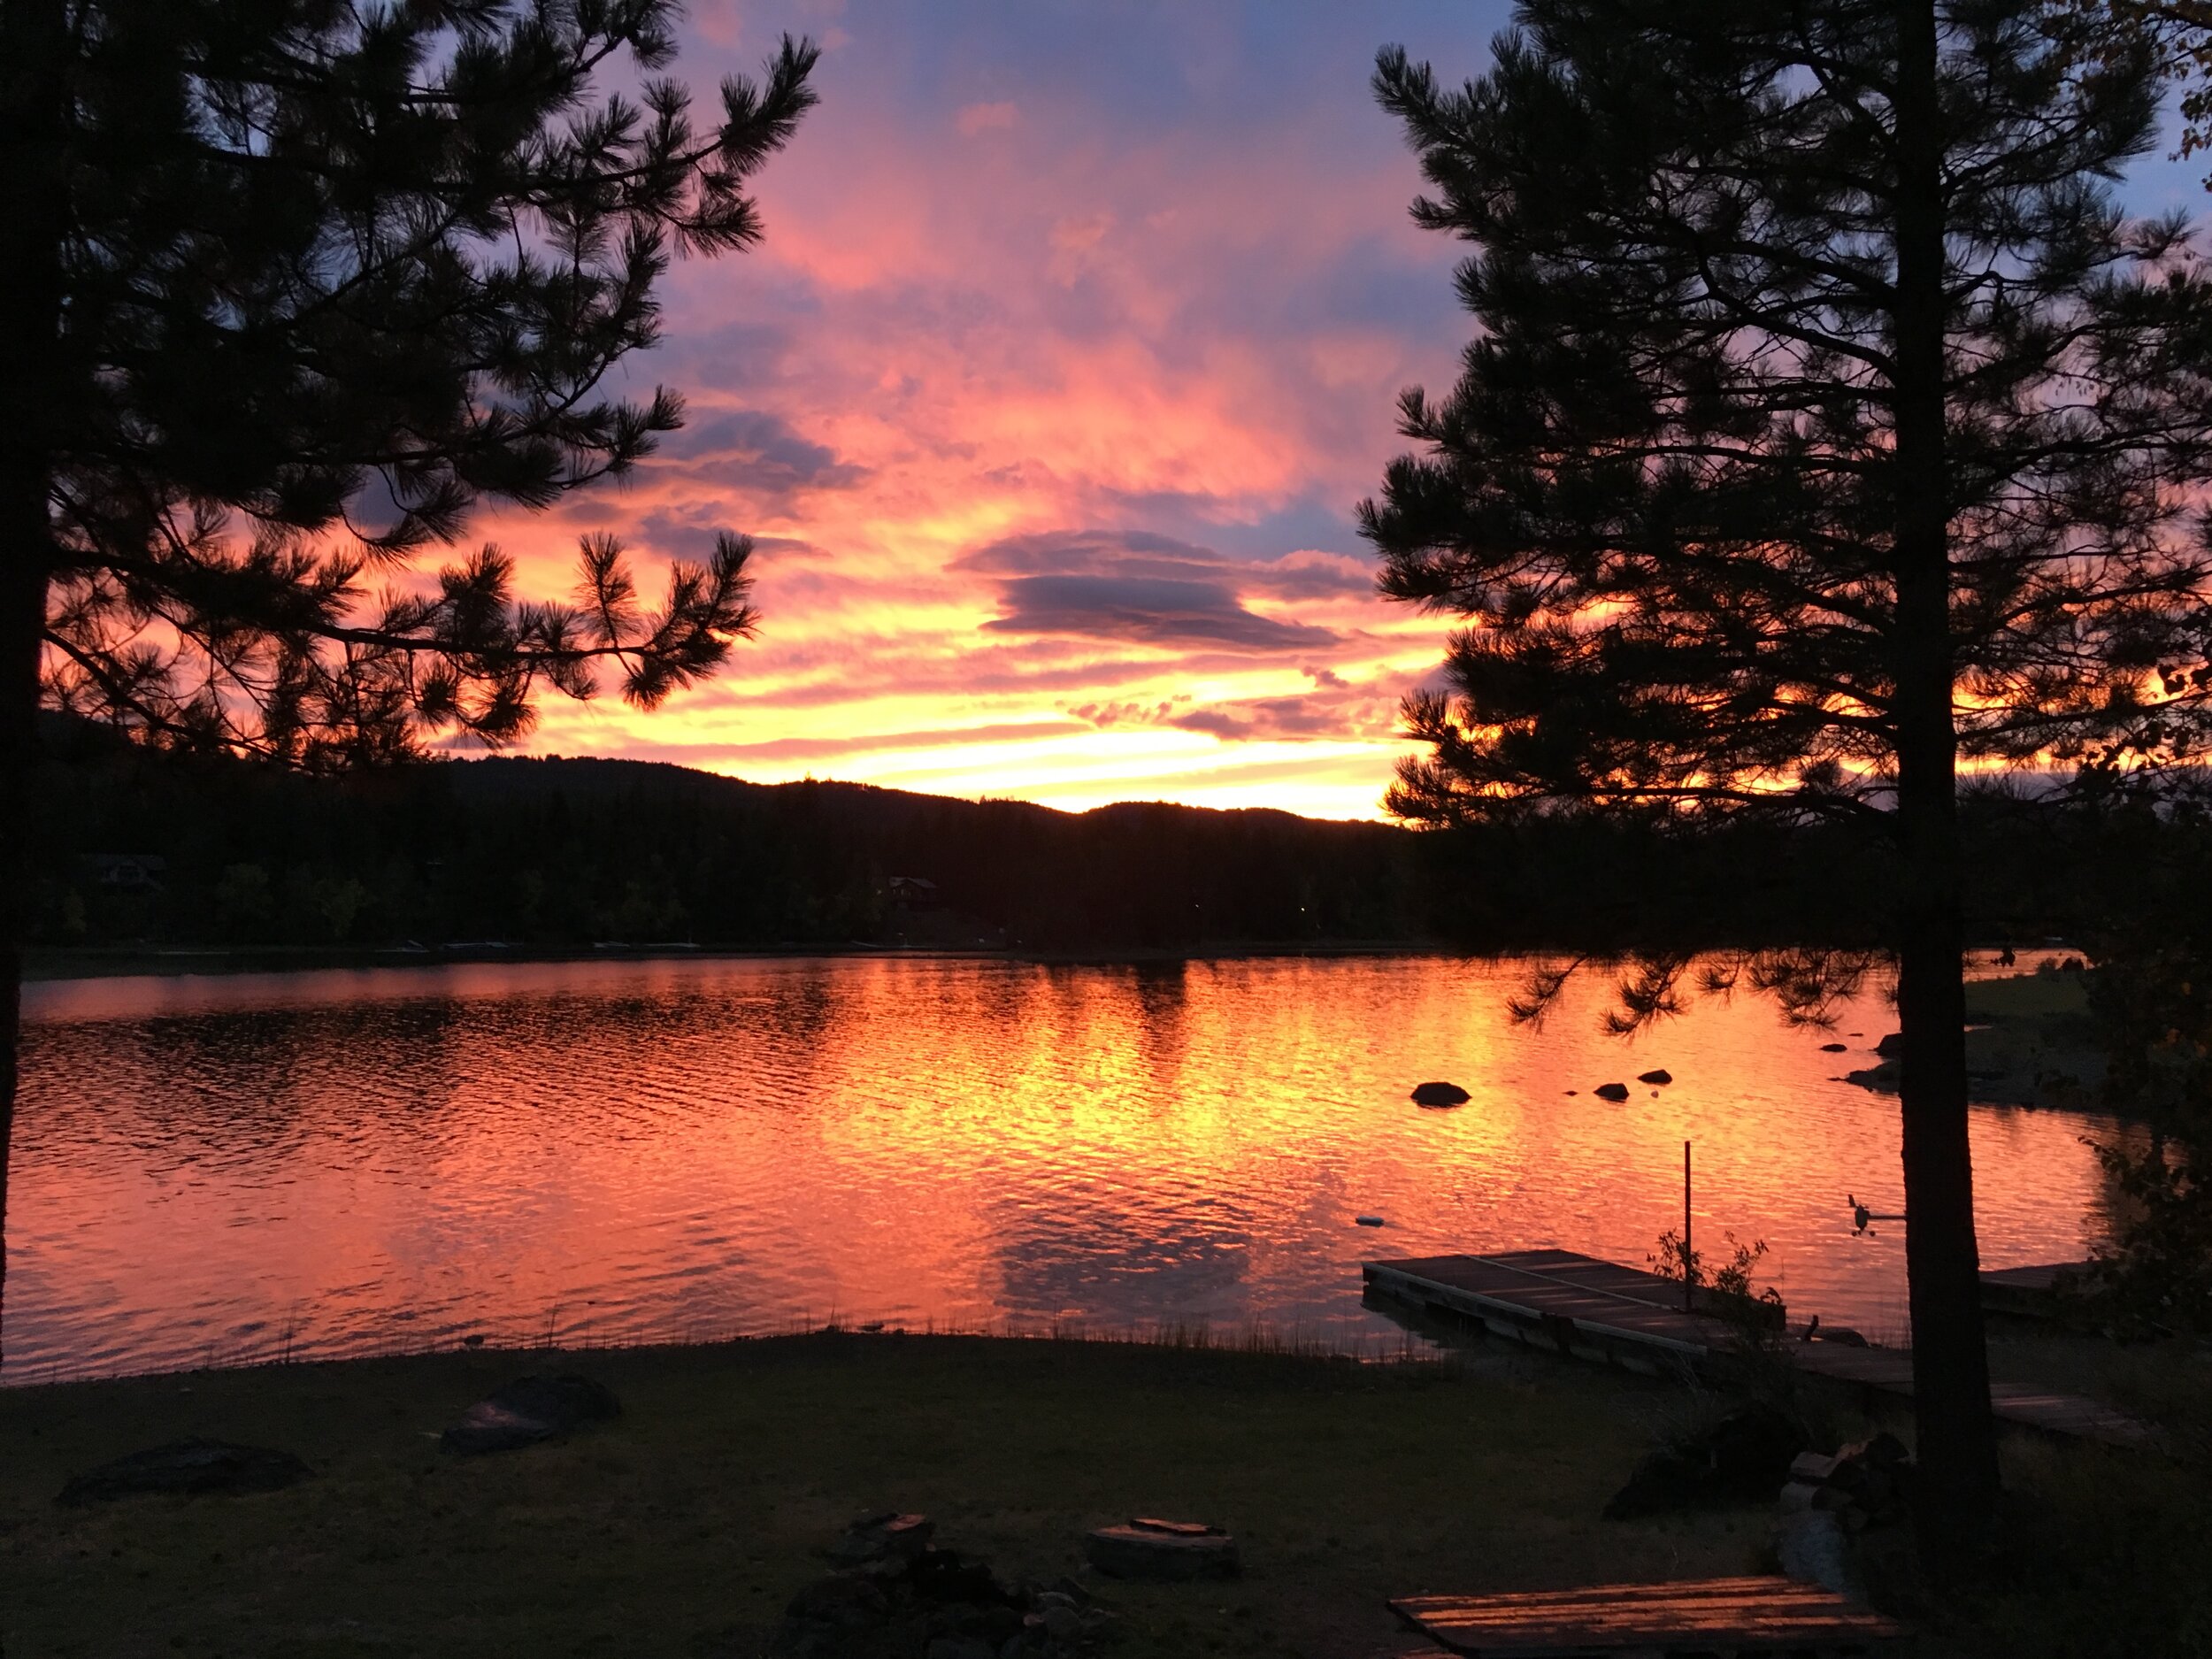  A stunning sunset captured from the O’s family home down the road from the Kootenai. 